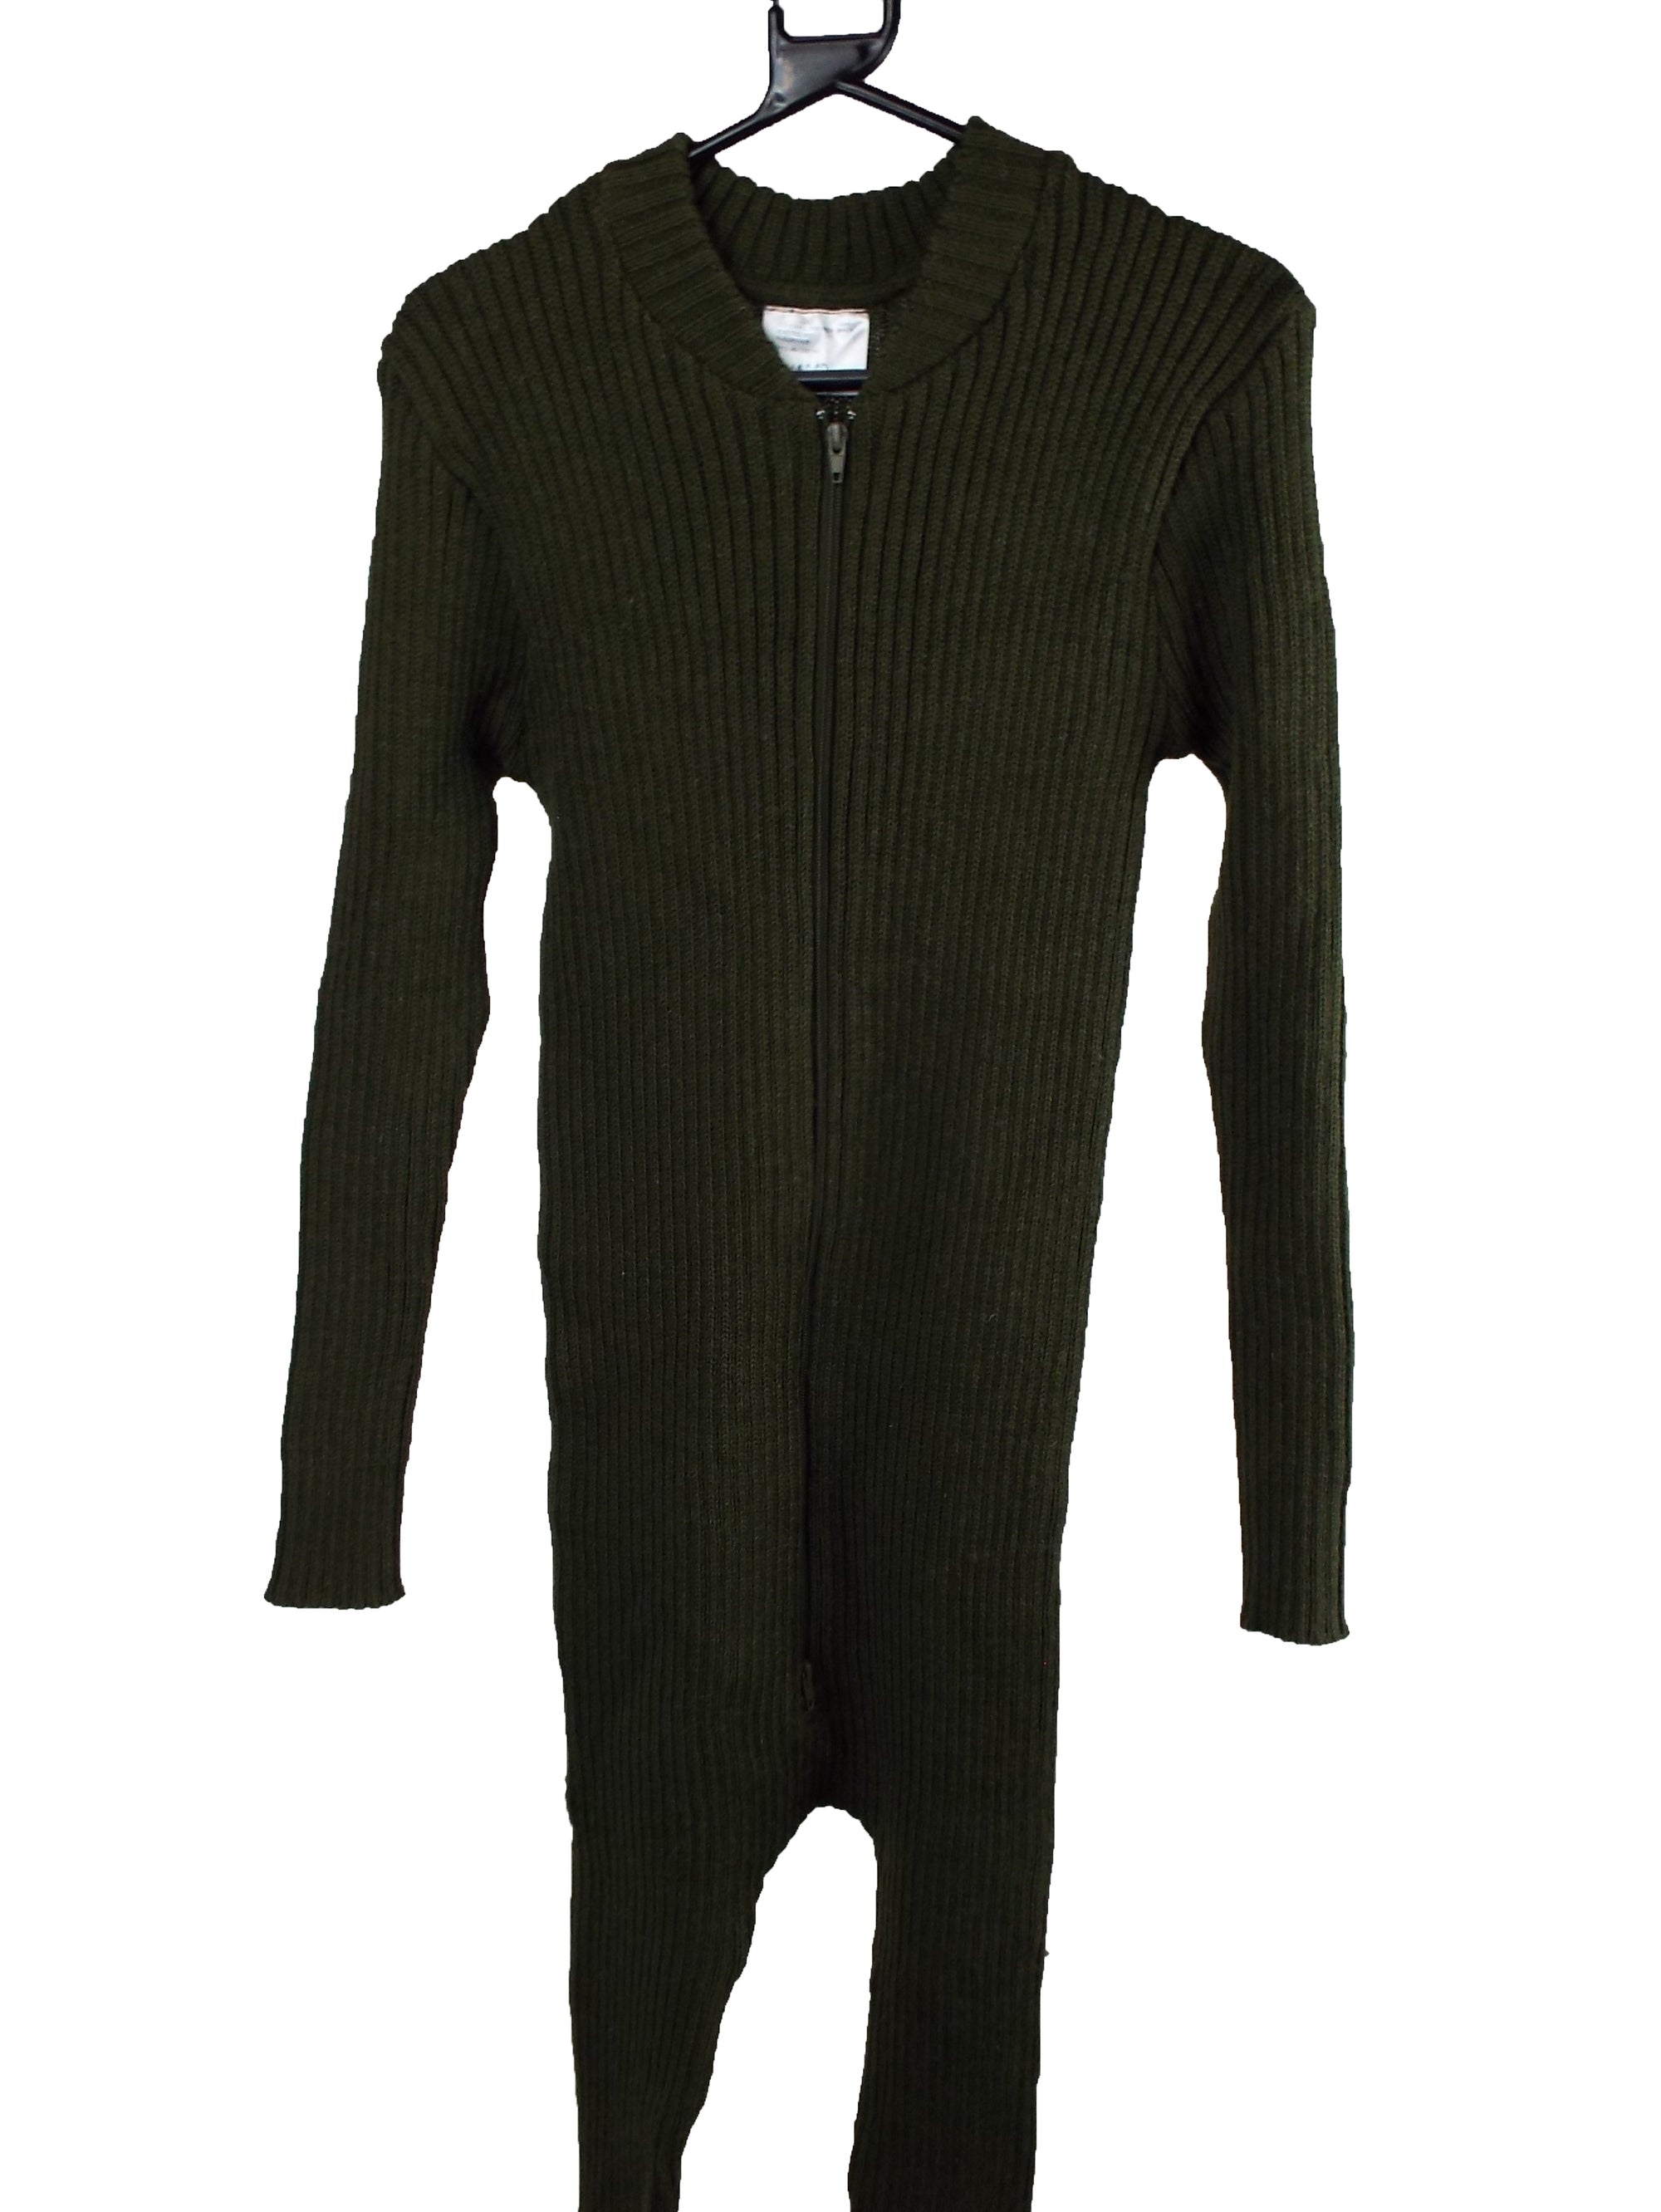 Dutch Army - Flight Suit Thermal Layer - Knitted "Onesie"- RAR